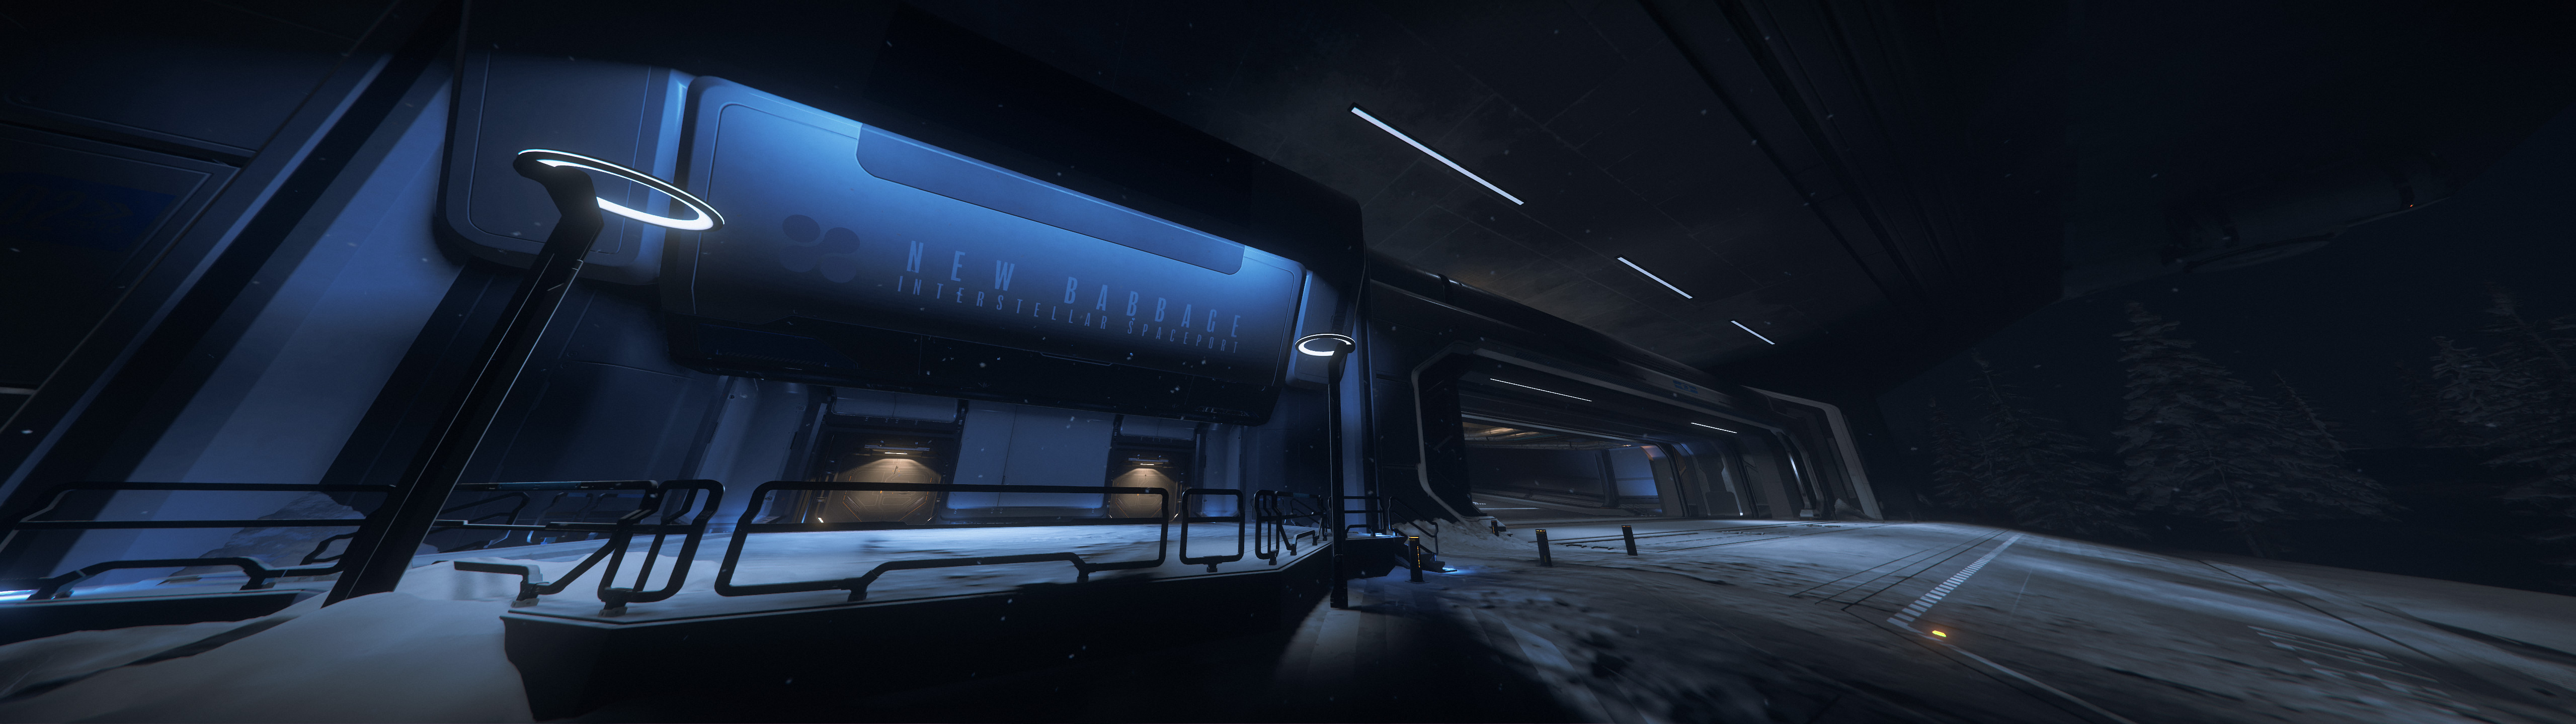 Star Citizen New Babbage Spaceport Garage Ultrawide Snow Microtech Video Games 5120x1440